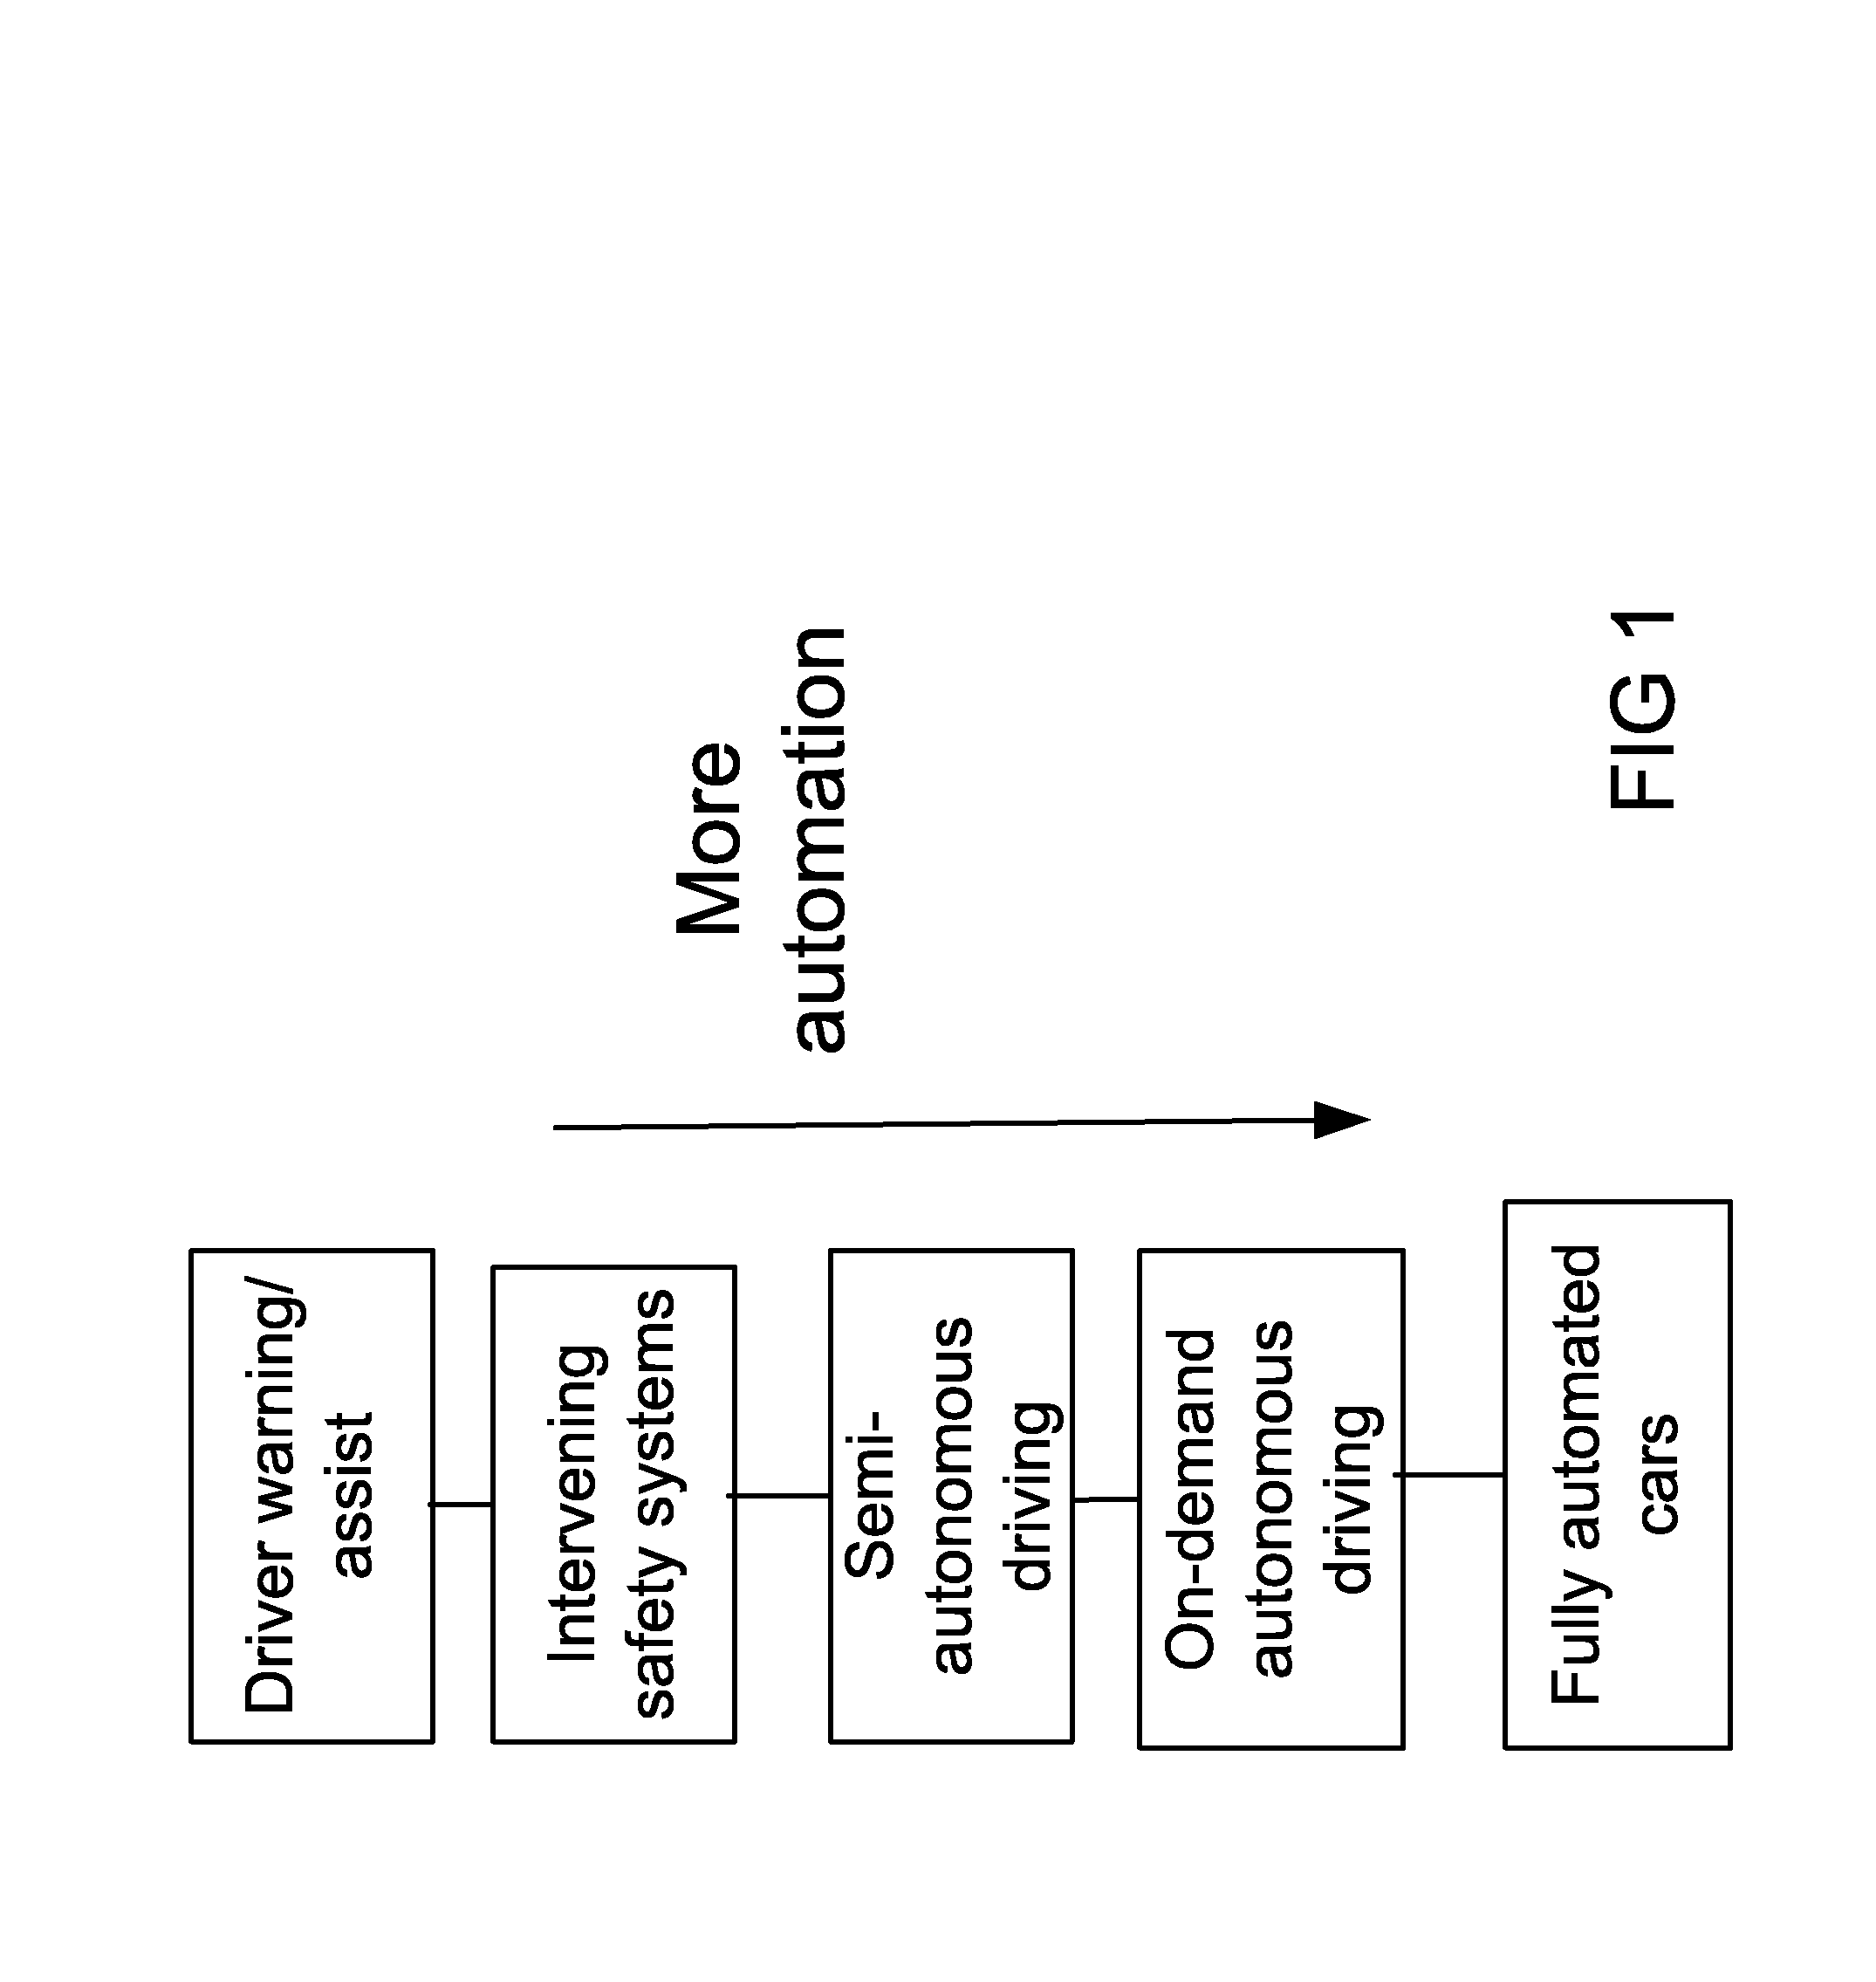 System and method for creating, storing, and updating local dynamic MAP database with safety attribute